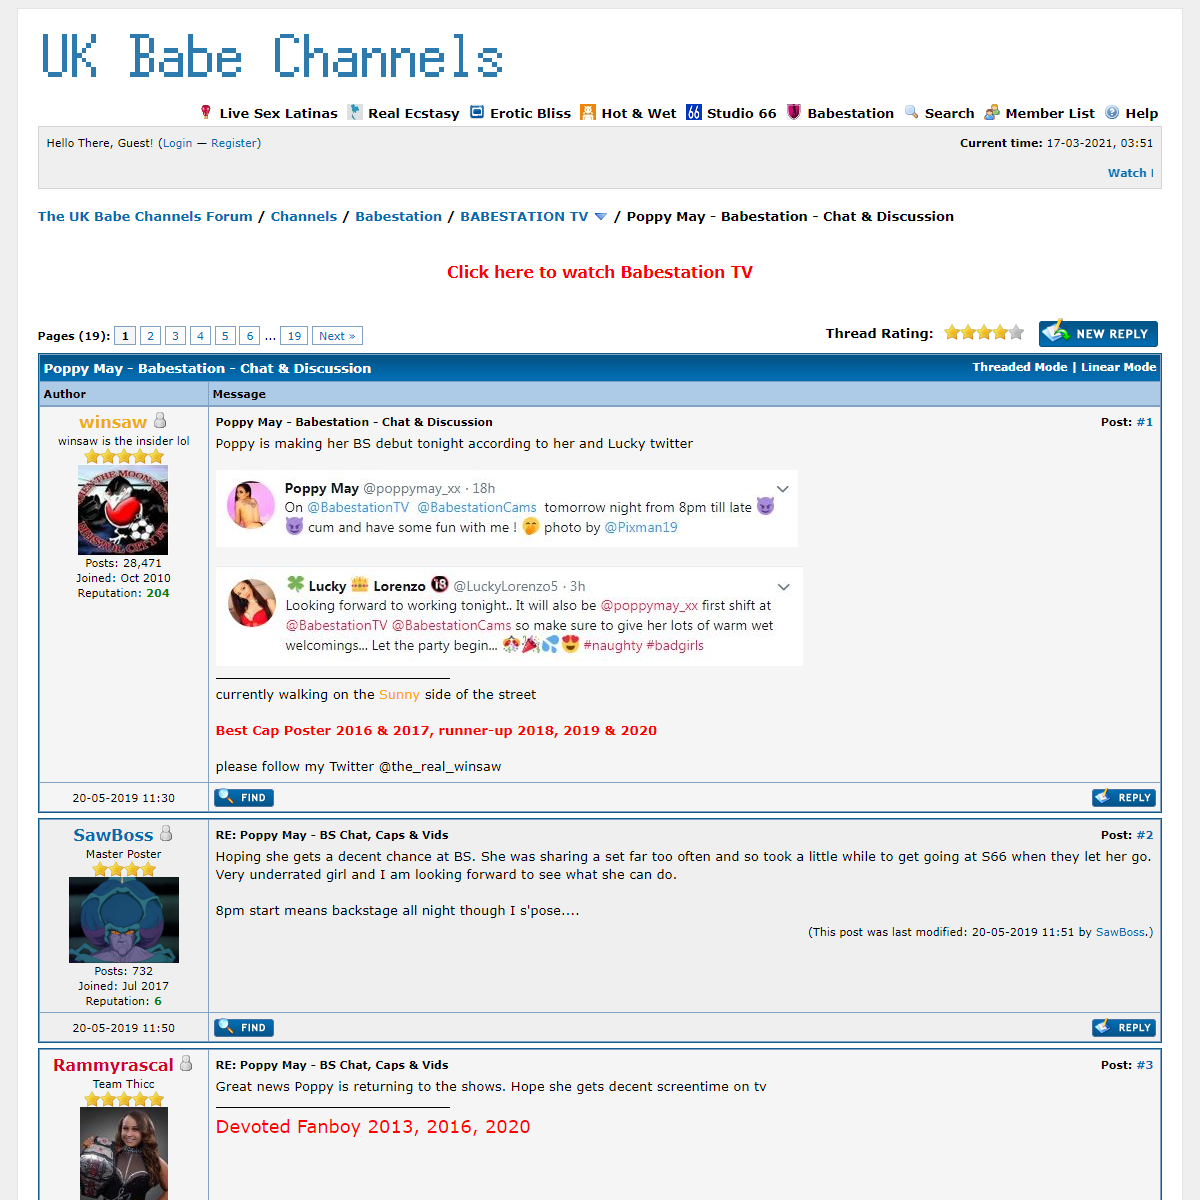 A complete backup of https://www.babeshows.co.uk/showthread.php?tid=77044